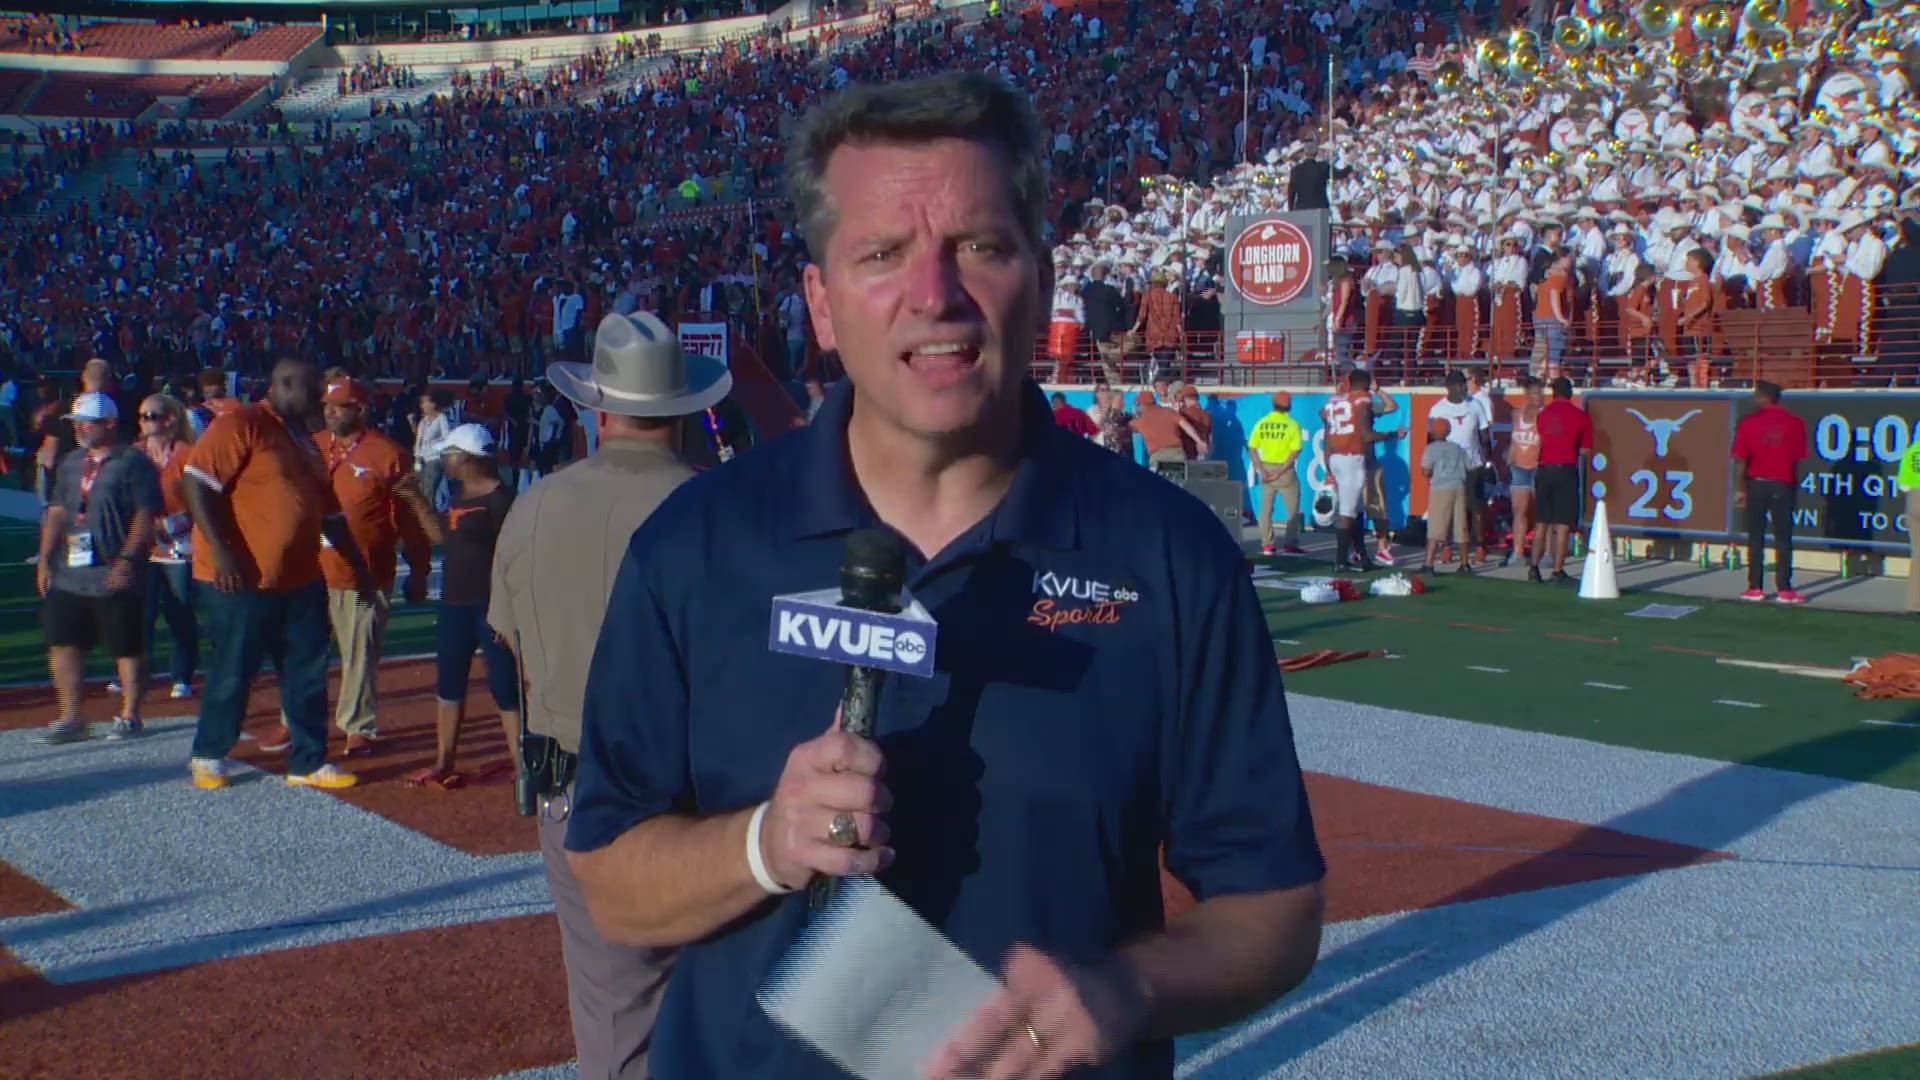 KVUE's Mike Barnes has the story of Texas edging Baylor.